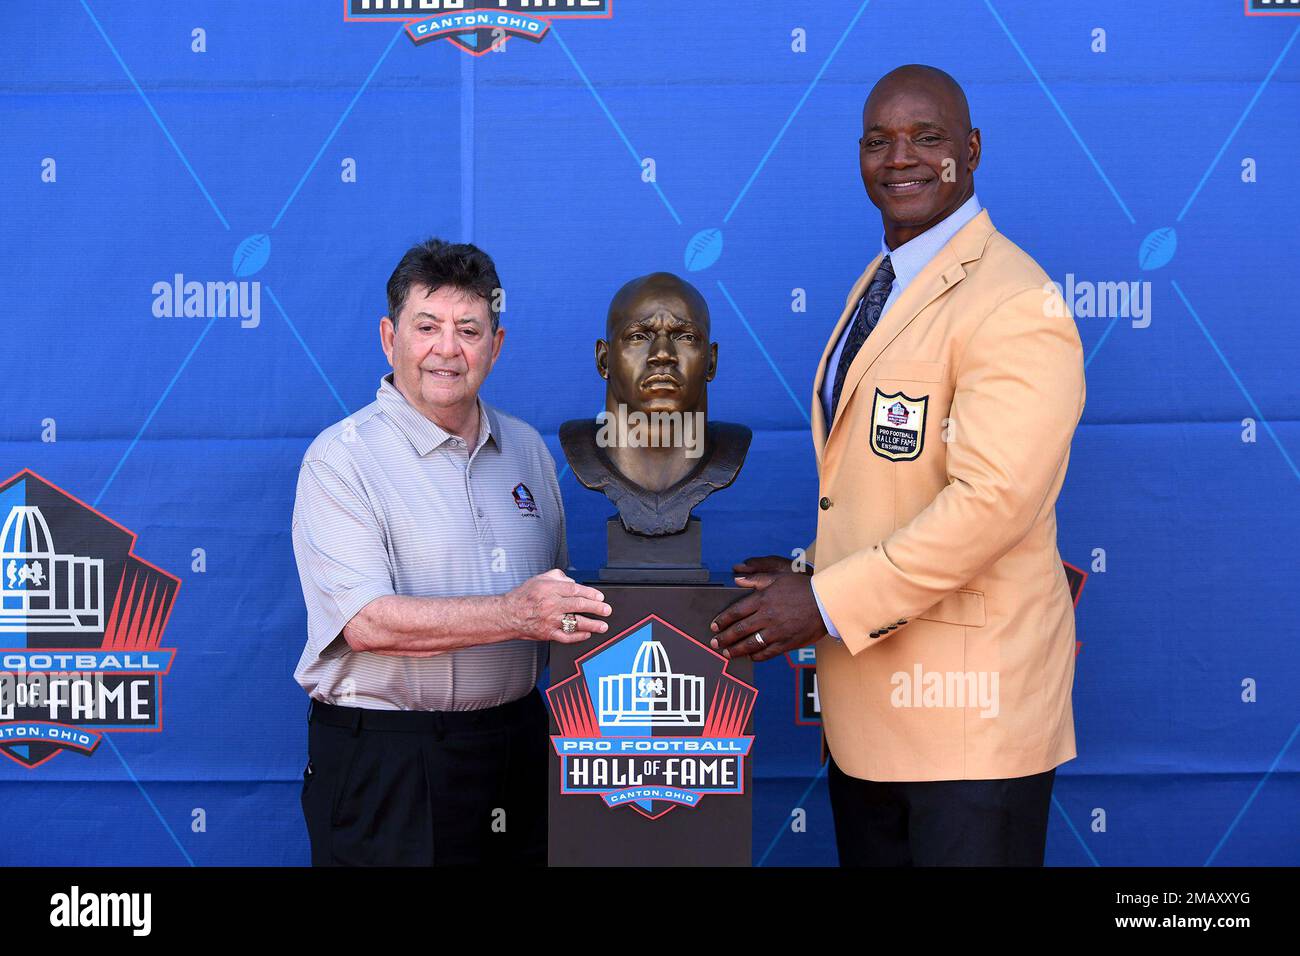 Former NFL player Bryant Young, right, poses with his bust and